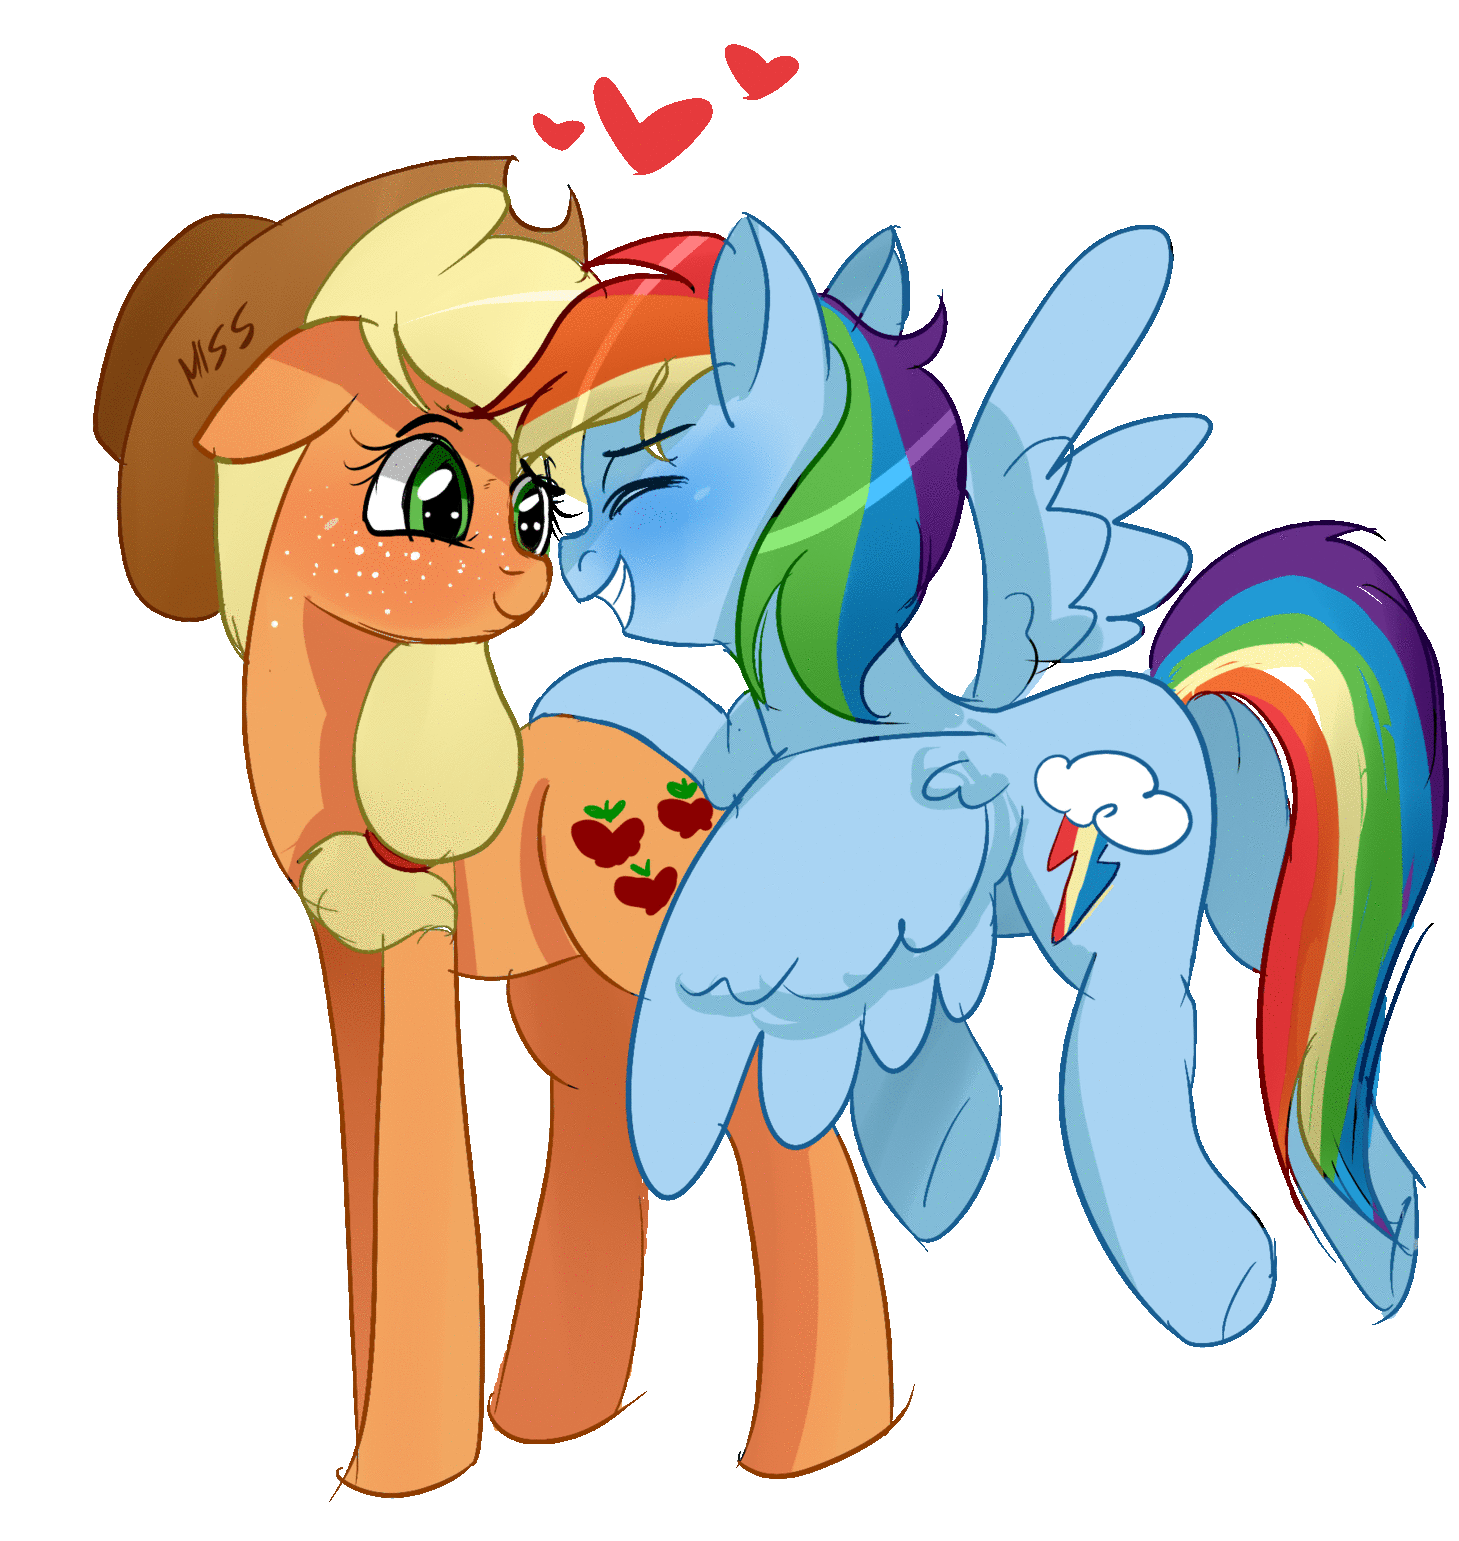 god bless appledash (gif) by MissPolycysticOvary | Blessed, My ...